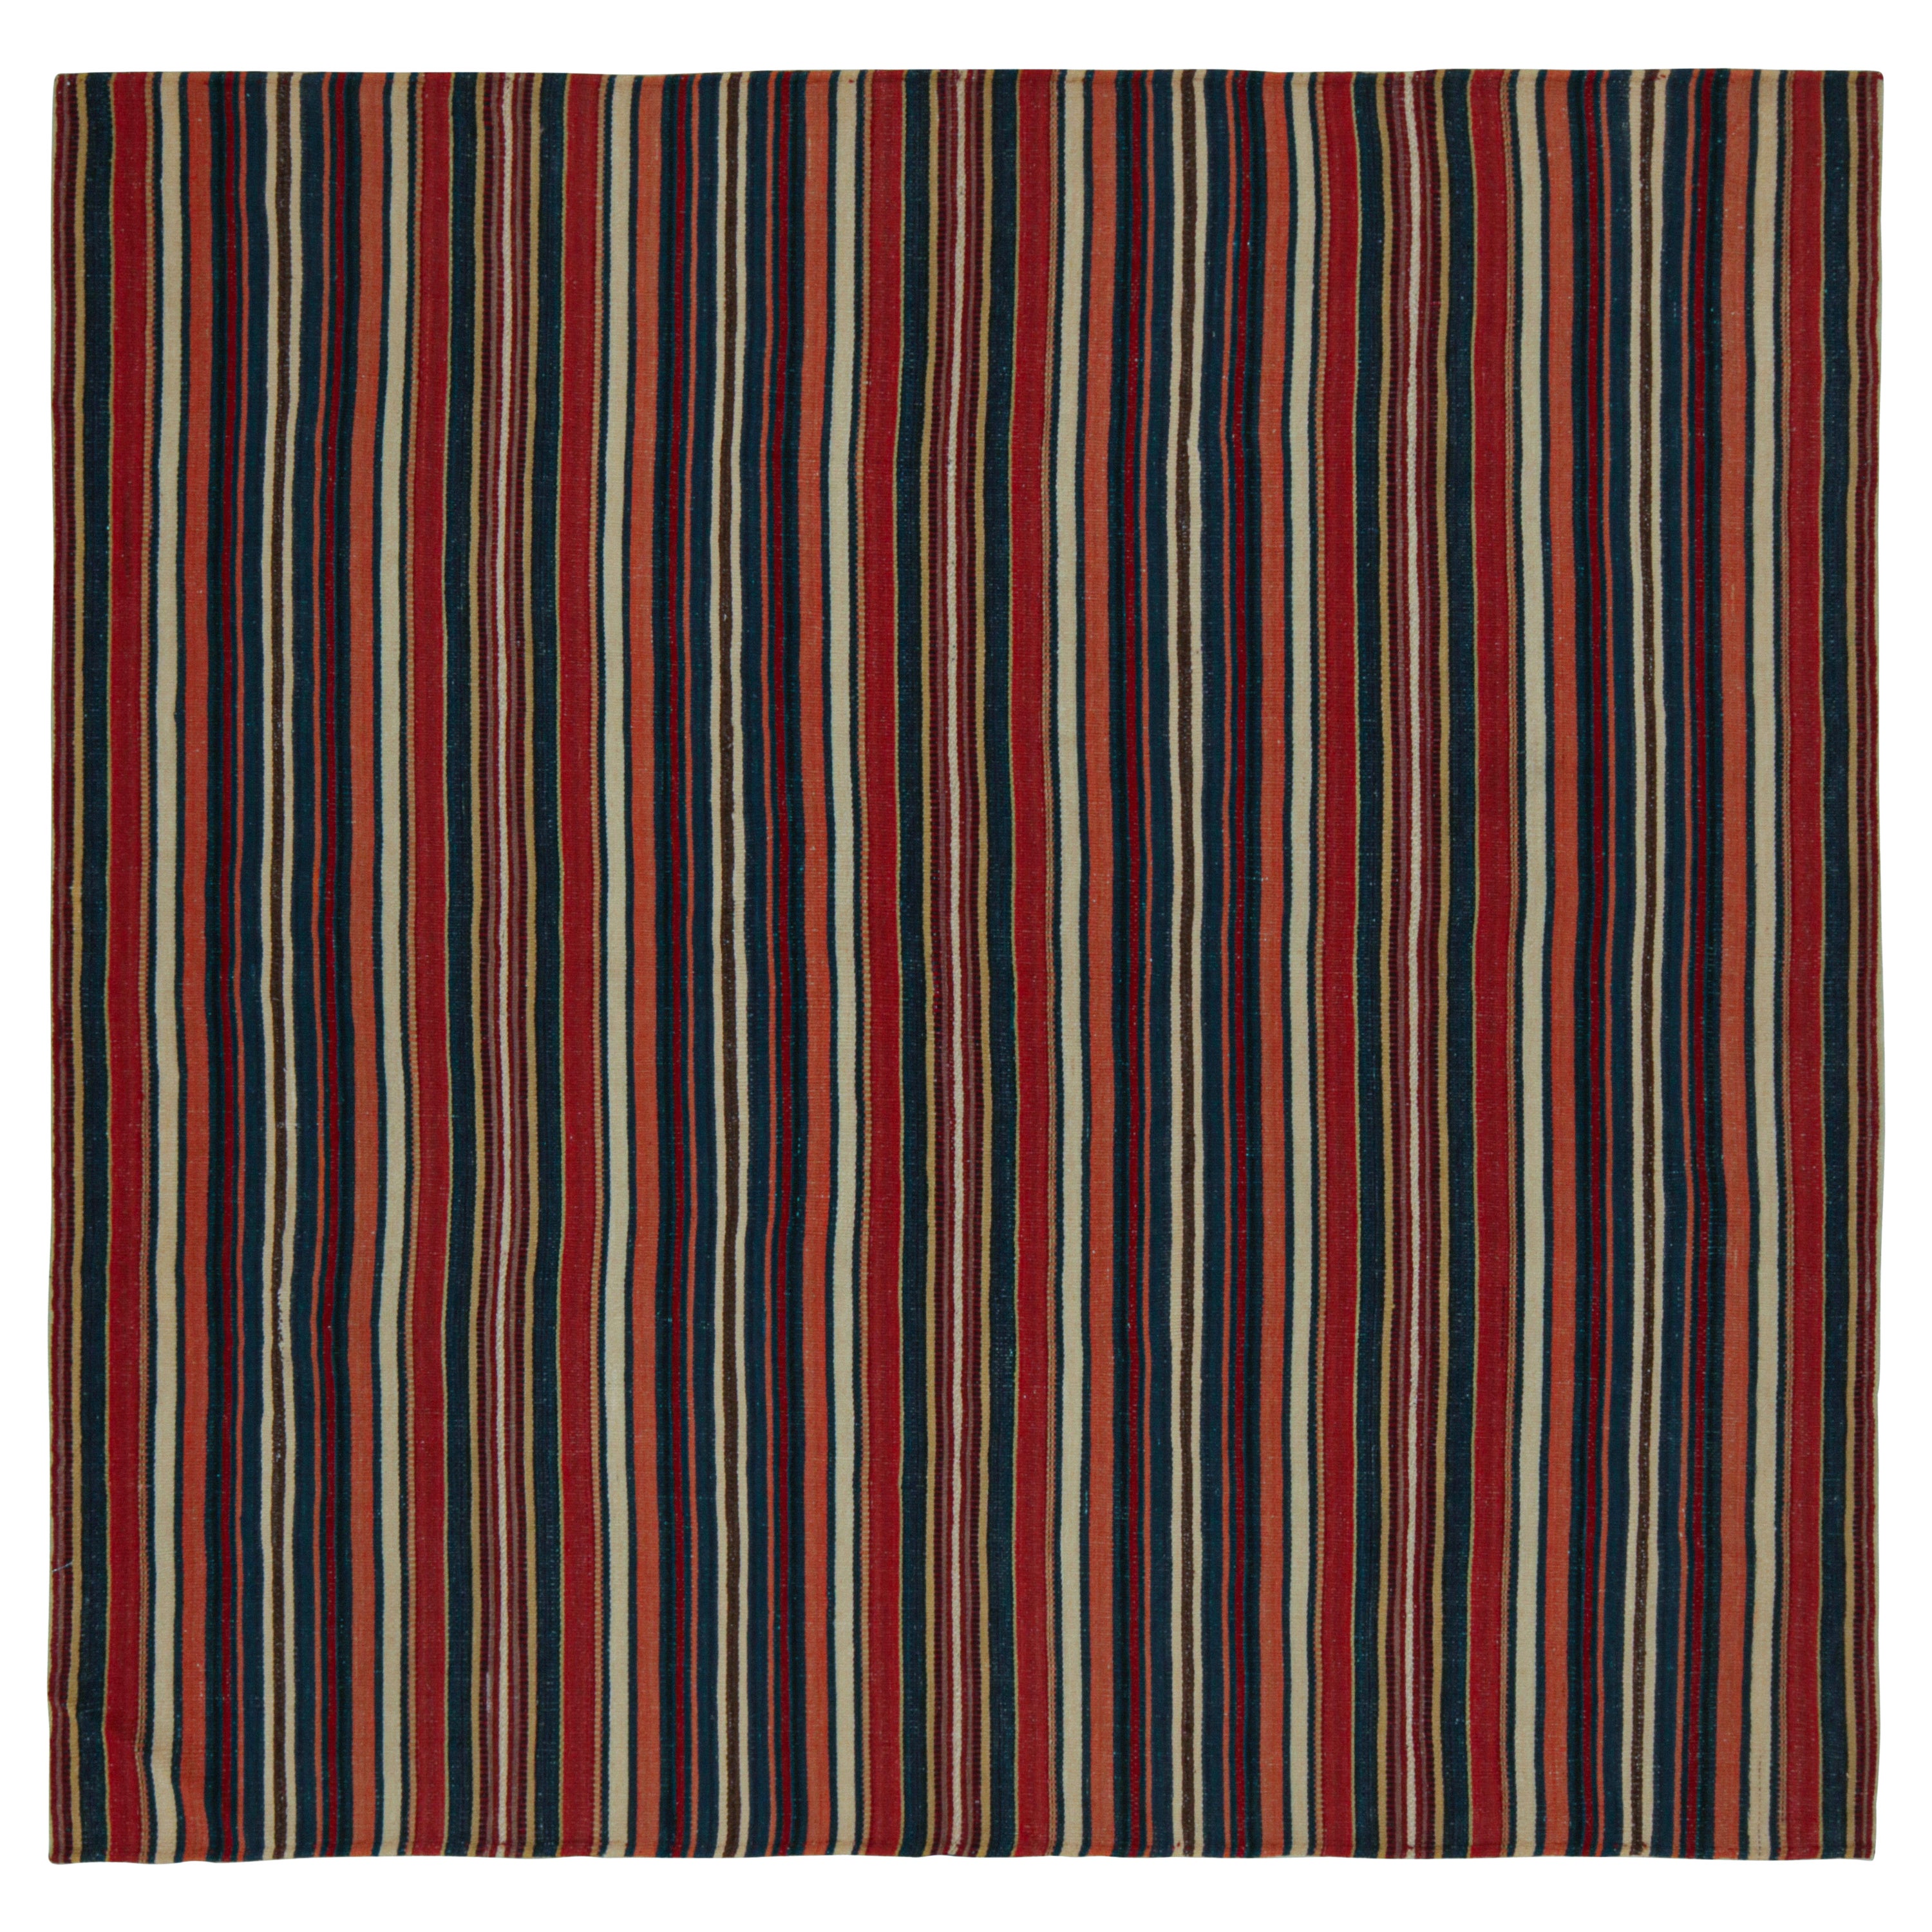 Vintage Persian Square Kilim in Red and Beige-Brown Stripes by Rug & Kilim For Sale